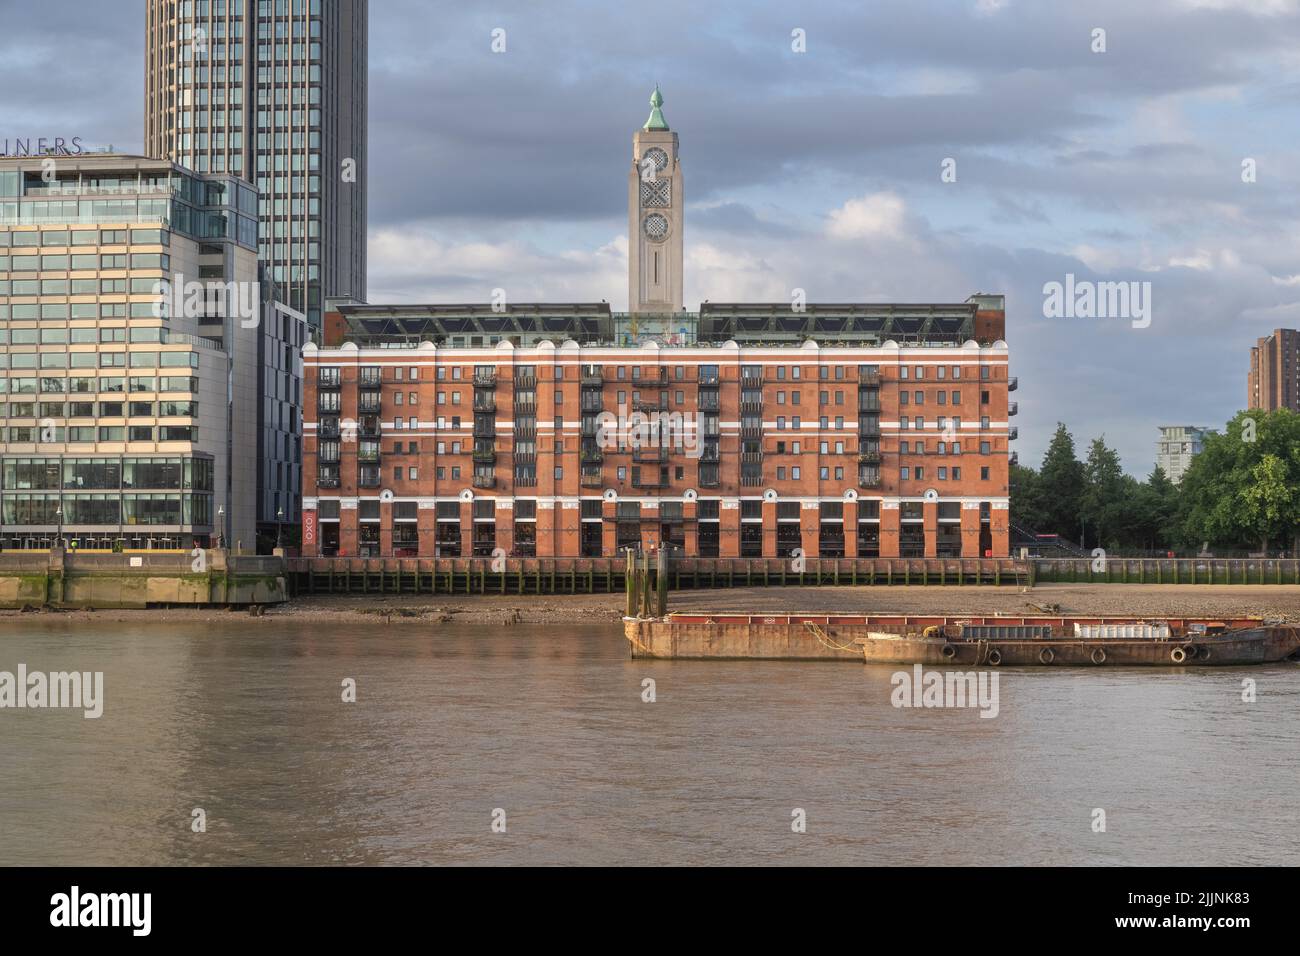 The Oxo Tower is a building with a prominent tower on the south bank of the River Thames in London Stock Photo